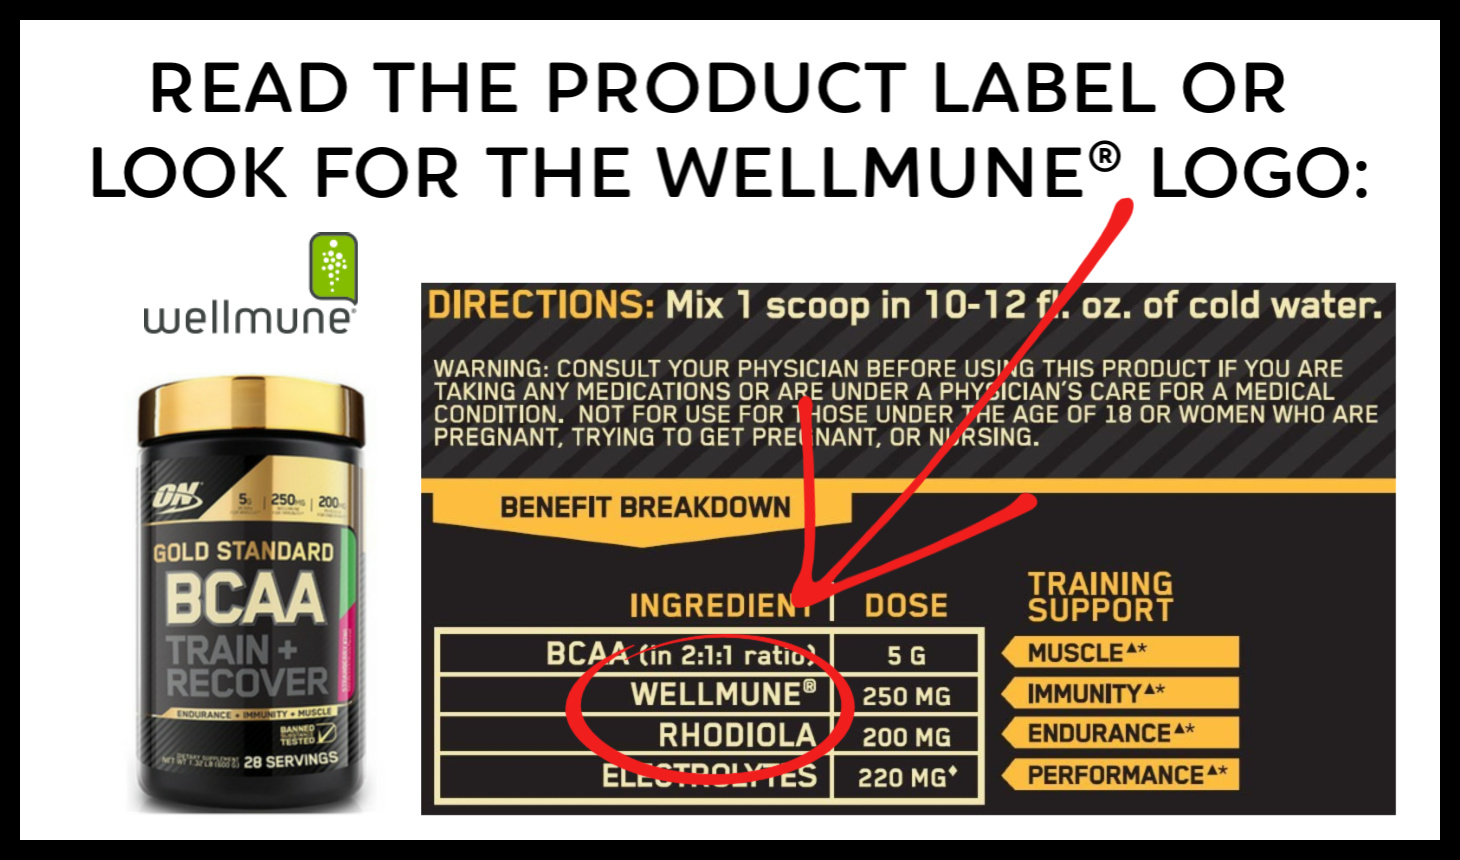 Wellmune (yeast beta glucan) product label example